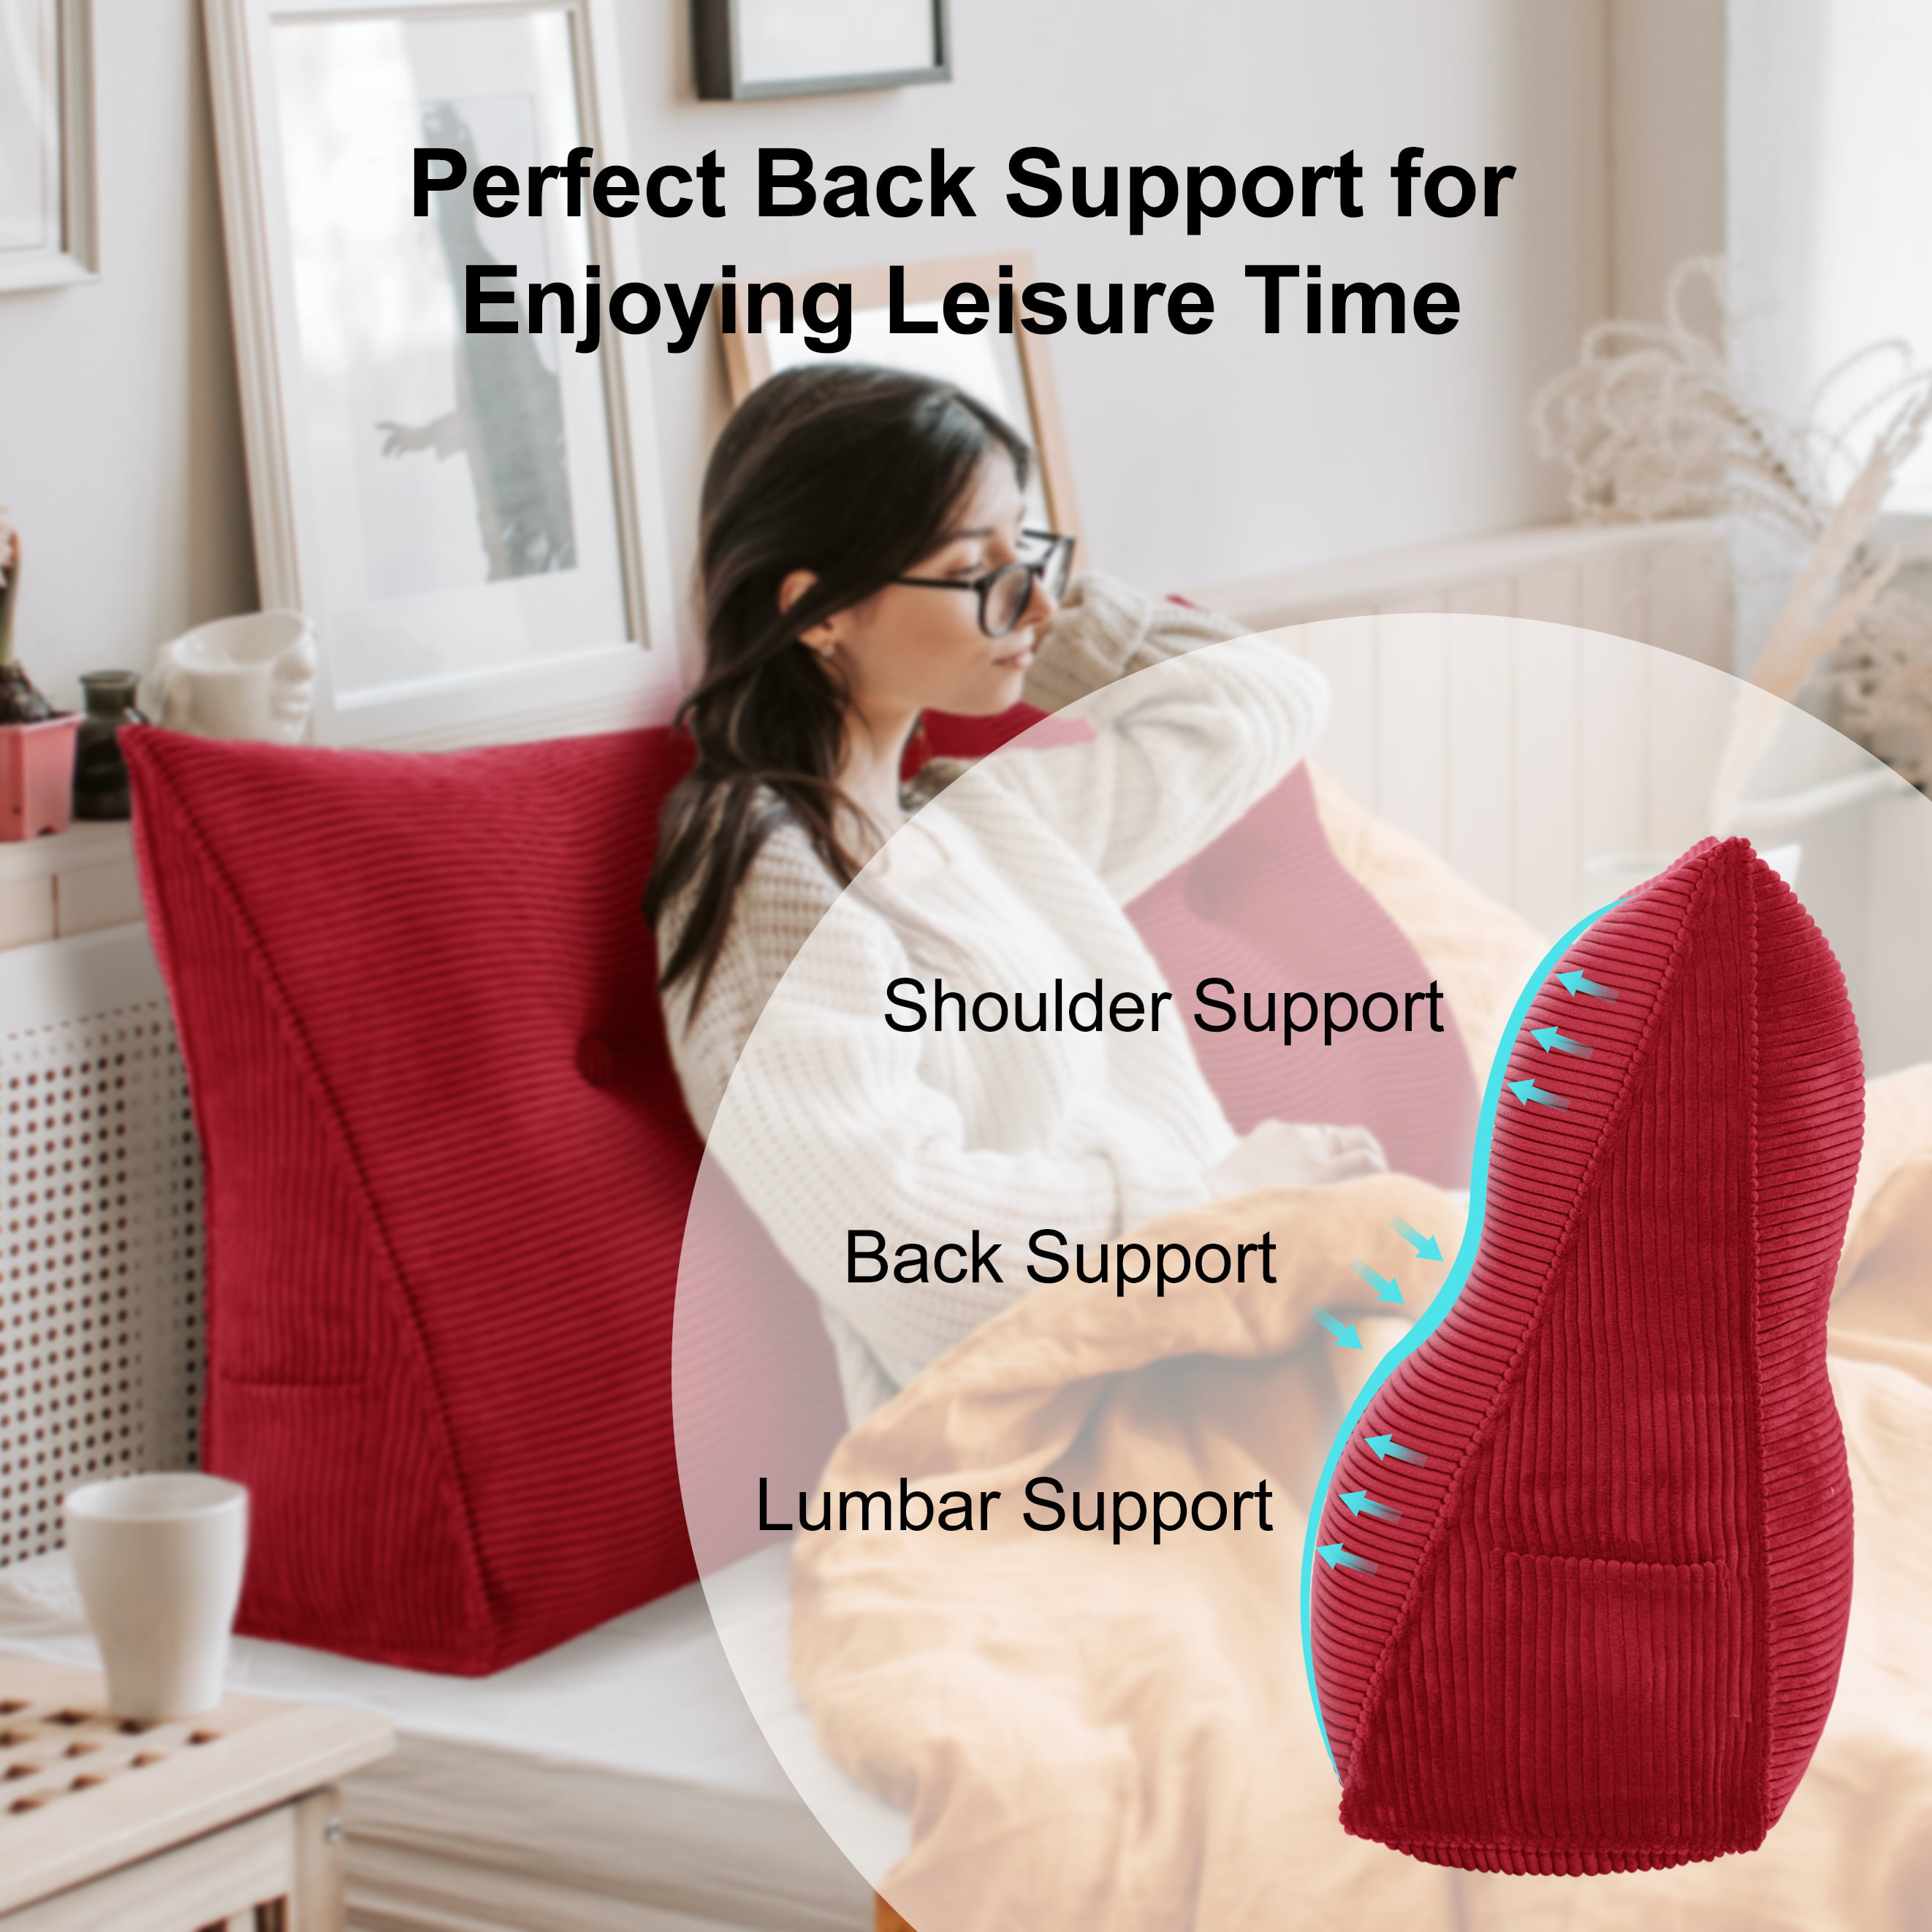 Wedge Shaped Back Support Pillow and Bed Rest Cushion - Folding Memory Foam Incline Cushion System for Back and Legs - for Reading, Gaming, Watching